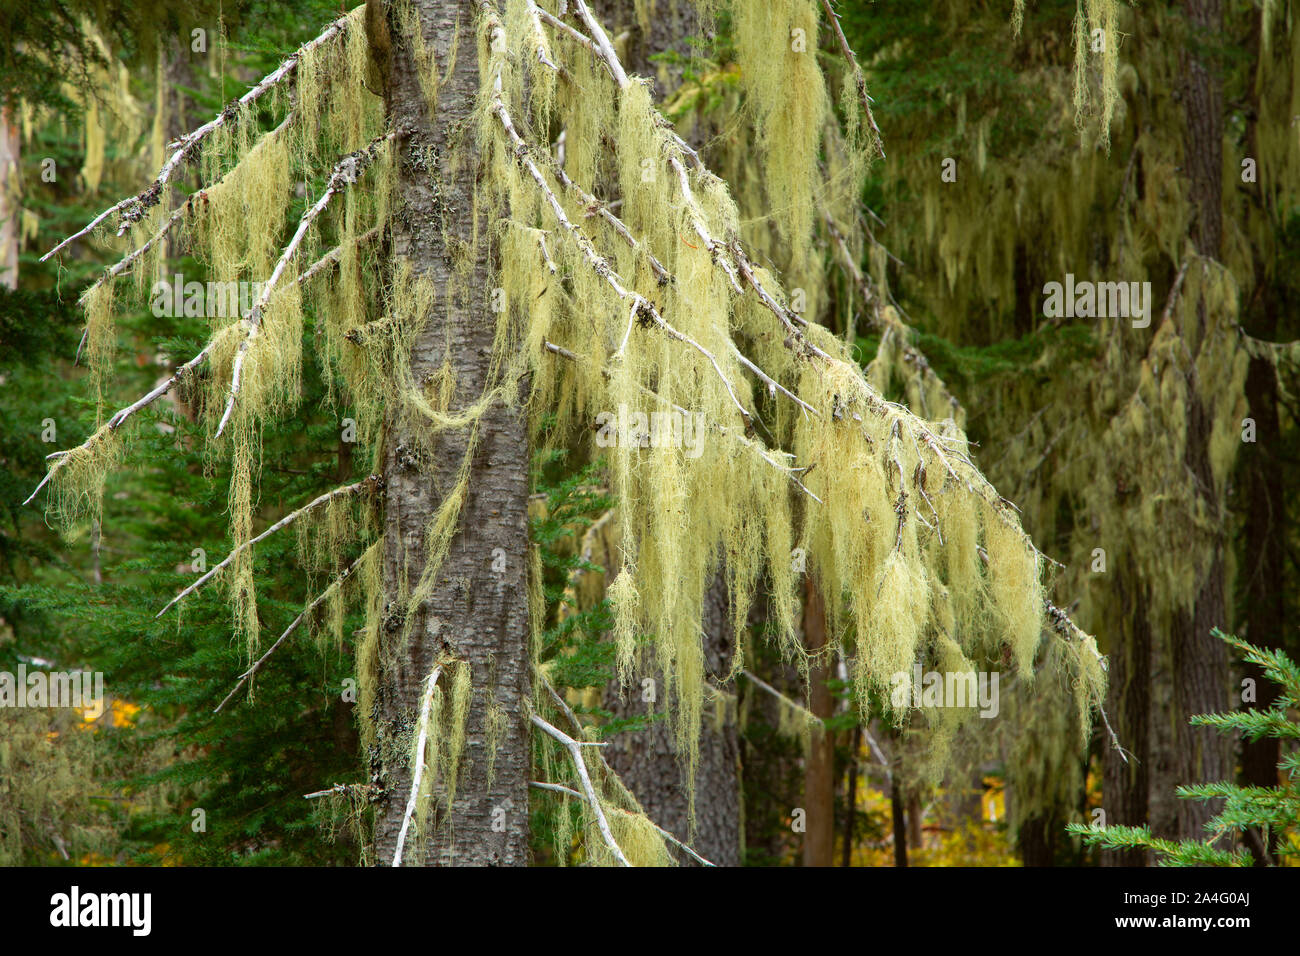 Lichen on Pacific silver fir, Olallie Lake Scenic Area, Pacific Crest National Scenic Trail, Mt Hood National Forest, Oregon Stock Photo